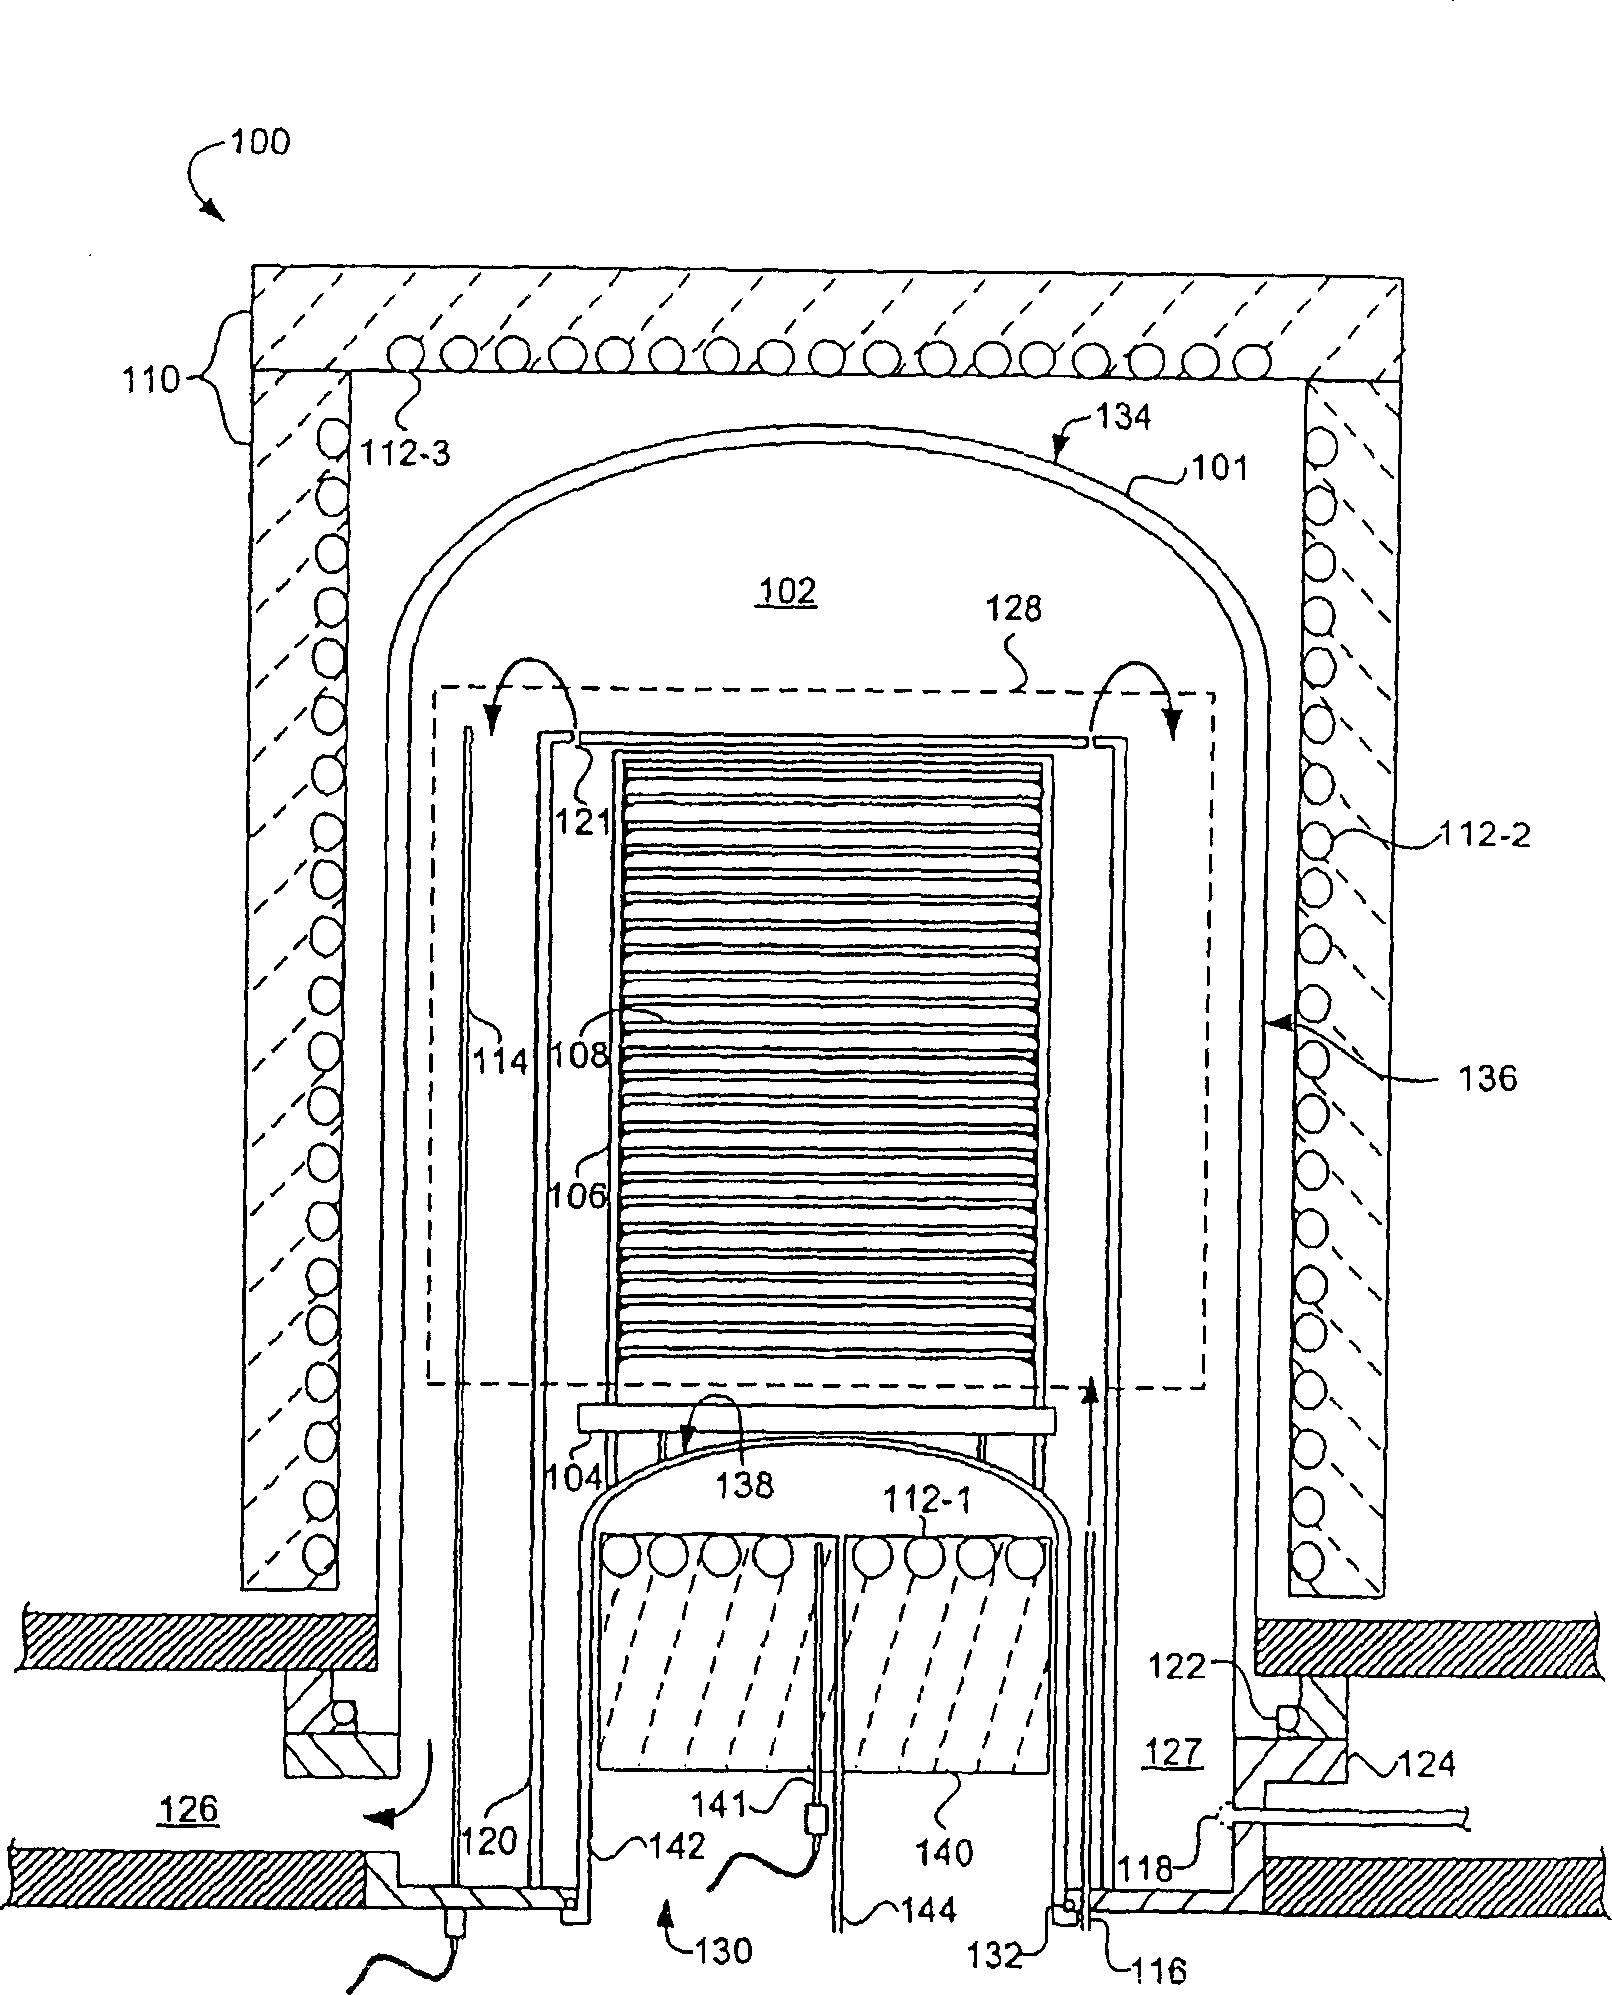 Heat treatment system and formable vertical chamber